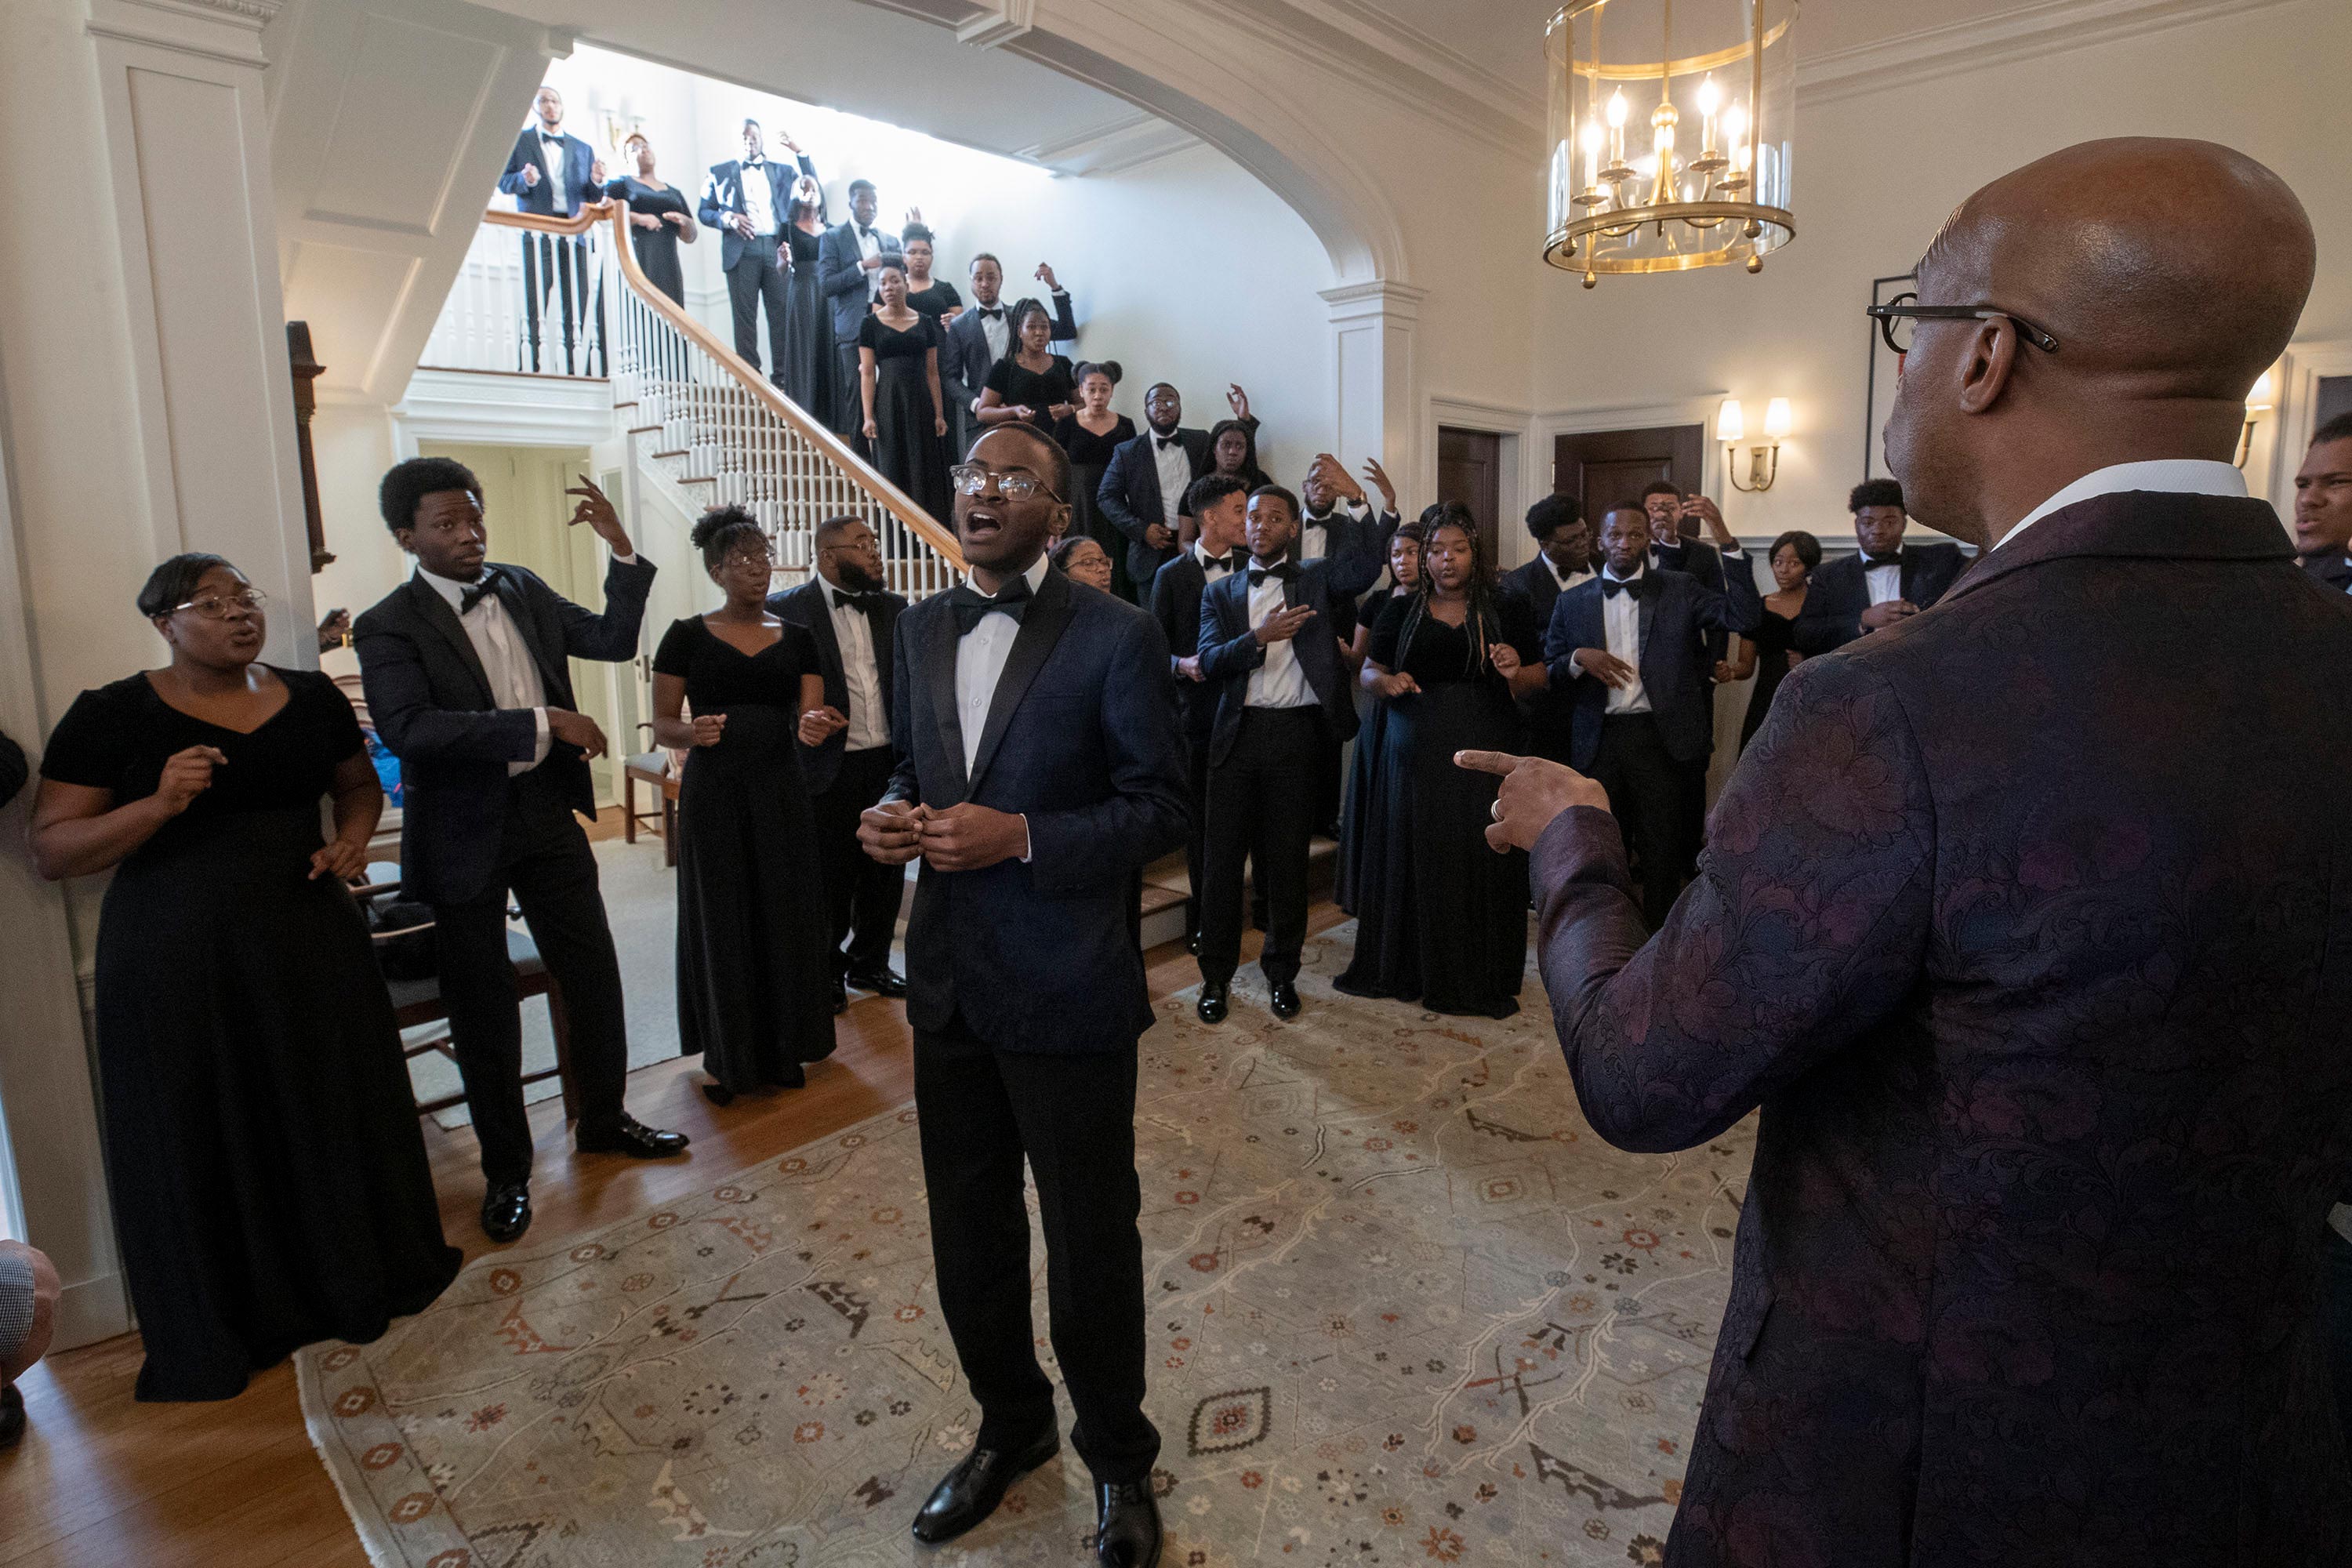 The Aeolians  standing in a hall wall and on the stairs dressed in black and white singing